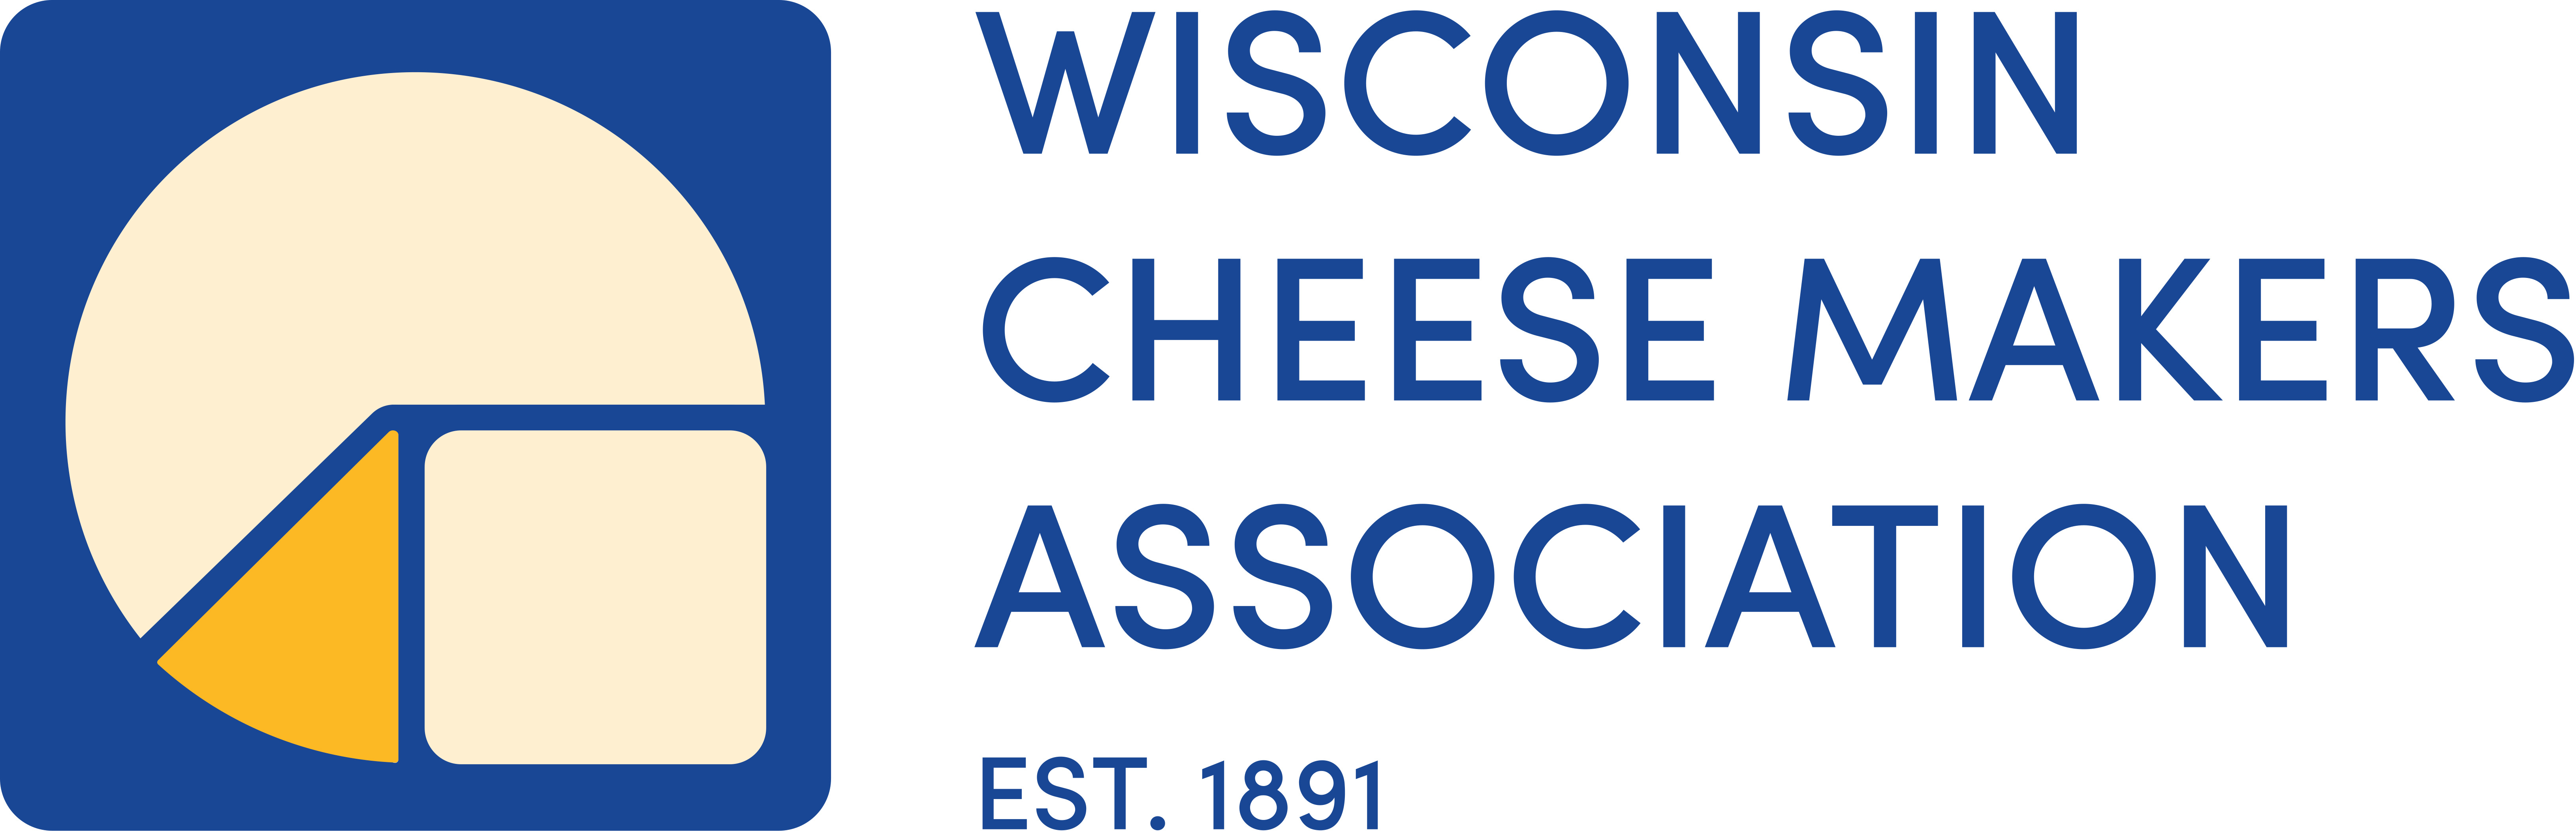 Wisconsin Cheese Makers Association (WCMA)